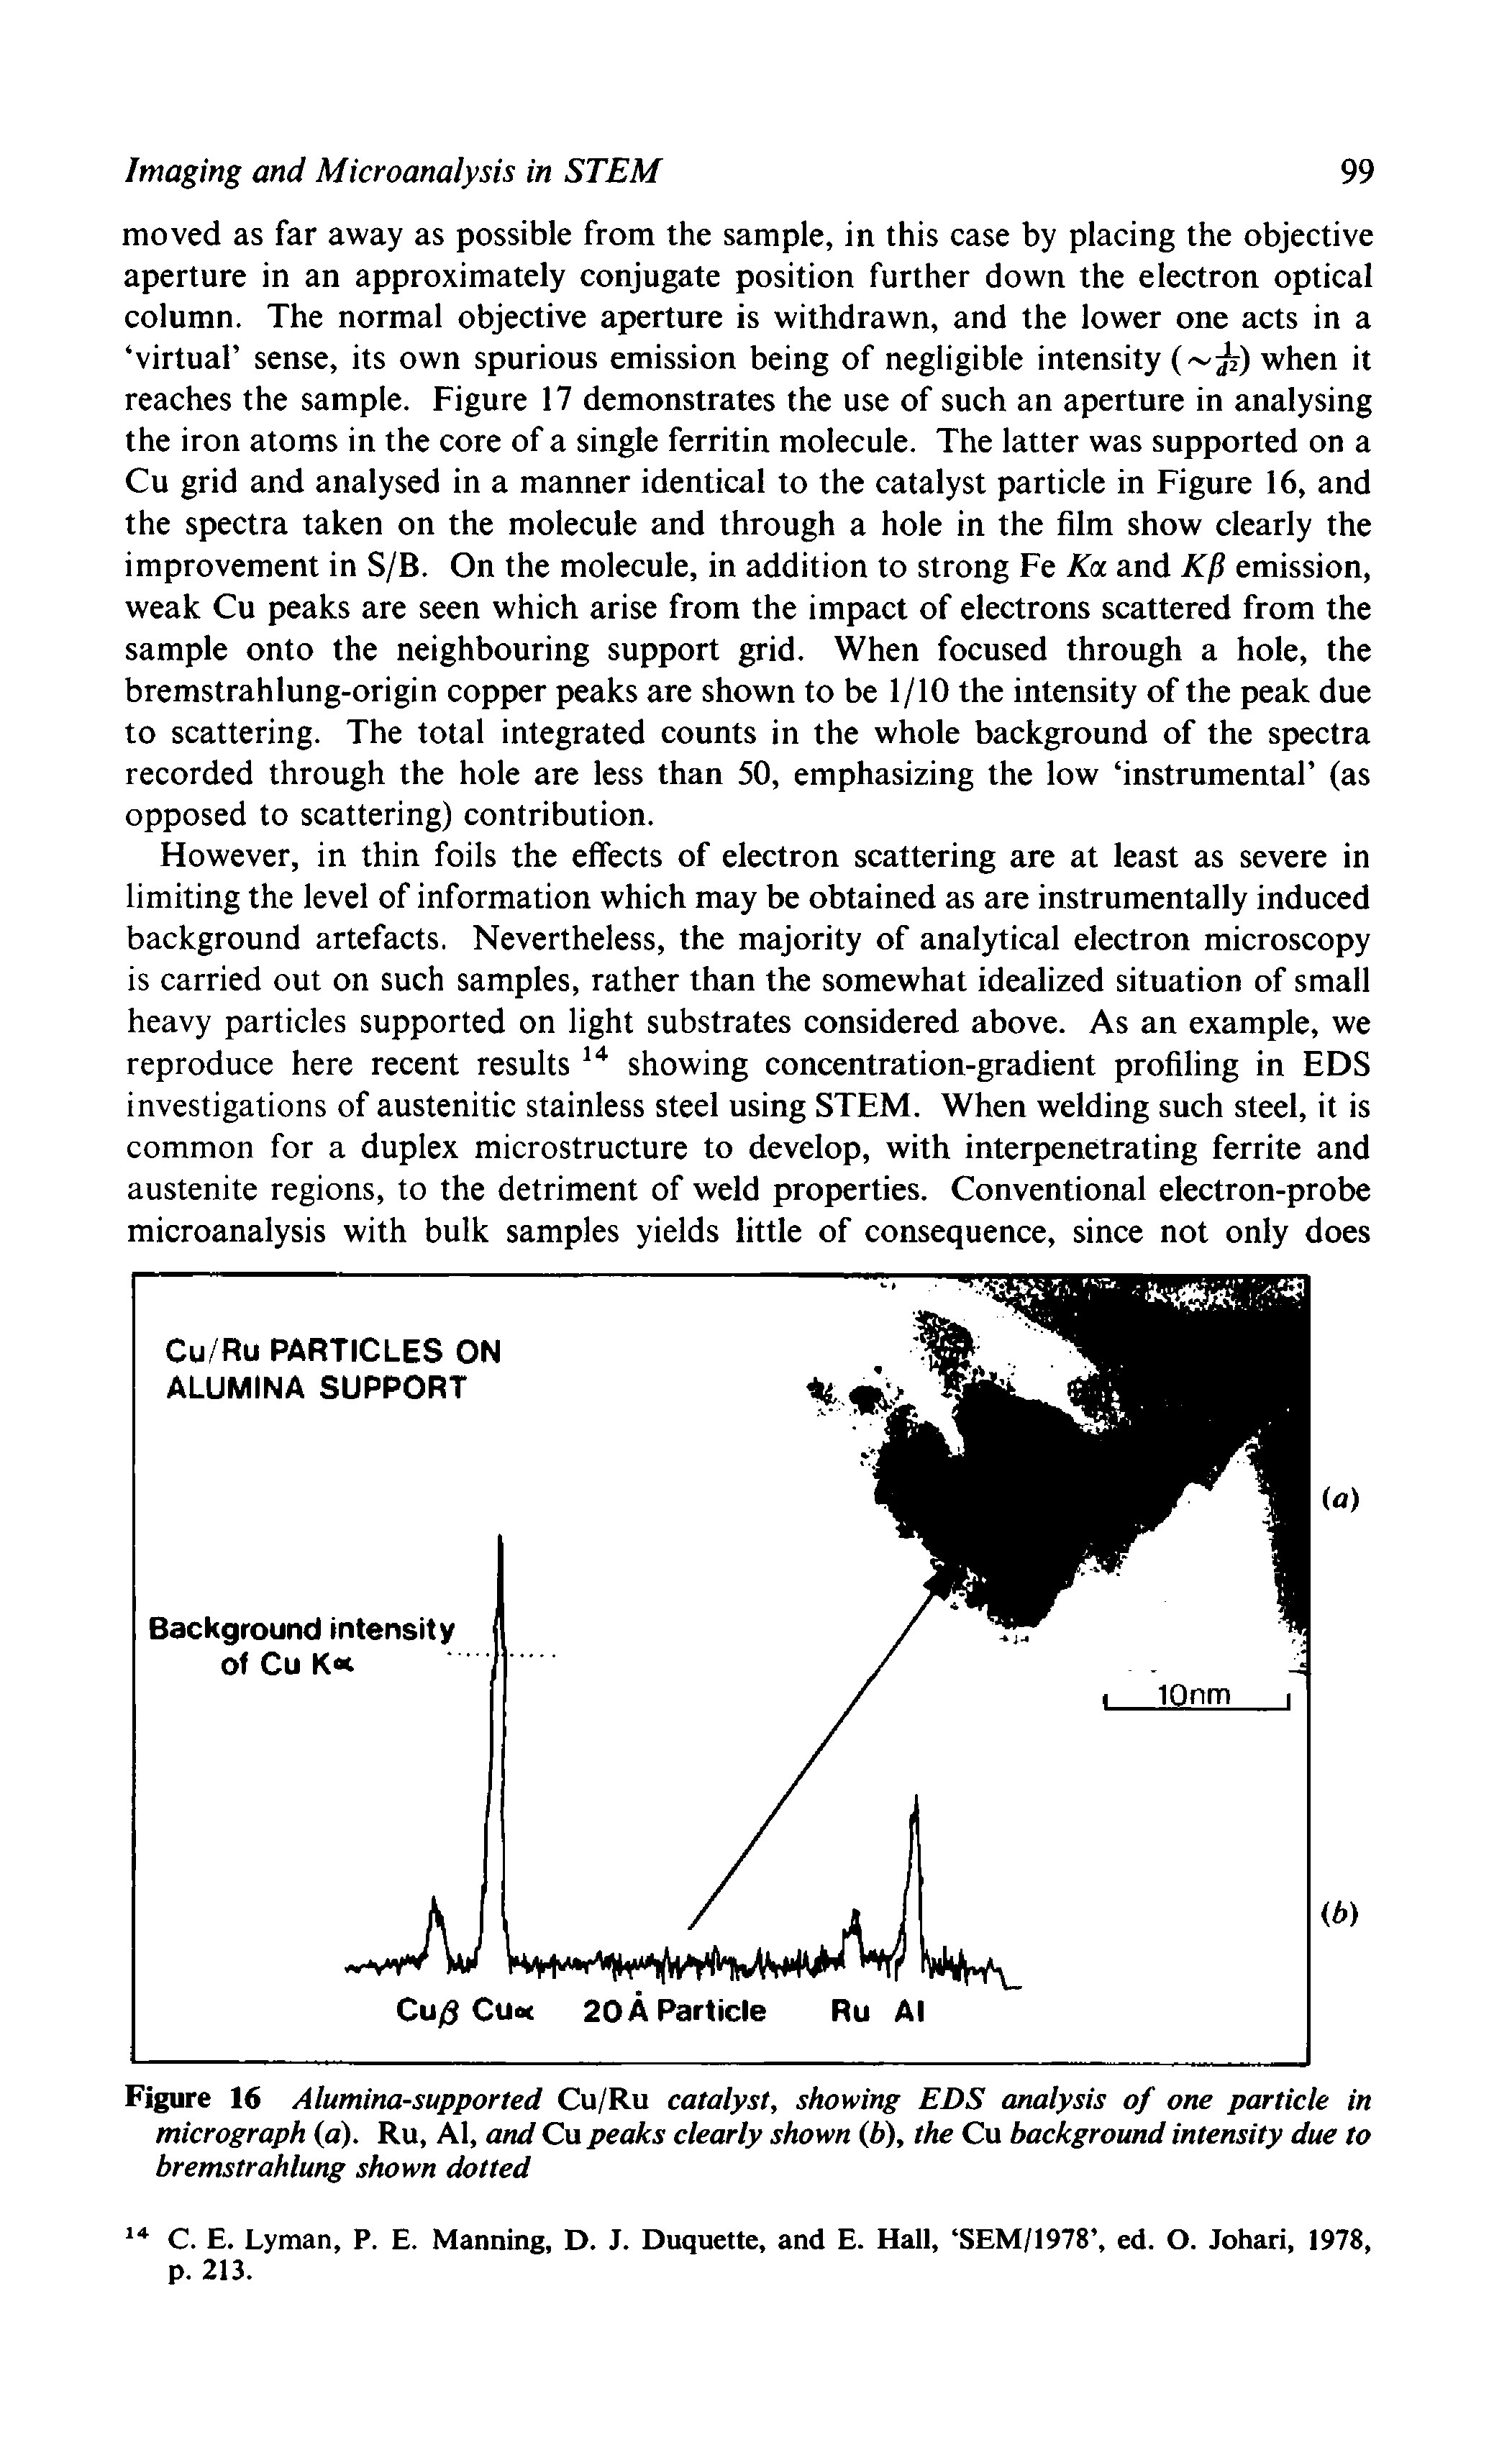 Figure 16 Alumina-supported Cu/Ru catalyst, showing EDS analysis of one particle in micrograph (a). Ru, Al, and Cu peaks clearly shown (b), the Cu background intensity due to bremstrahlung shown dotted...